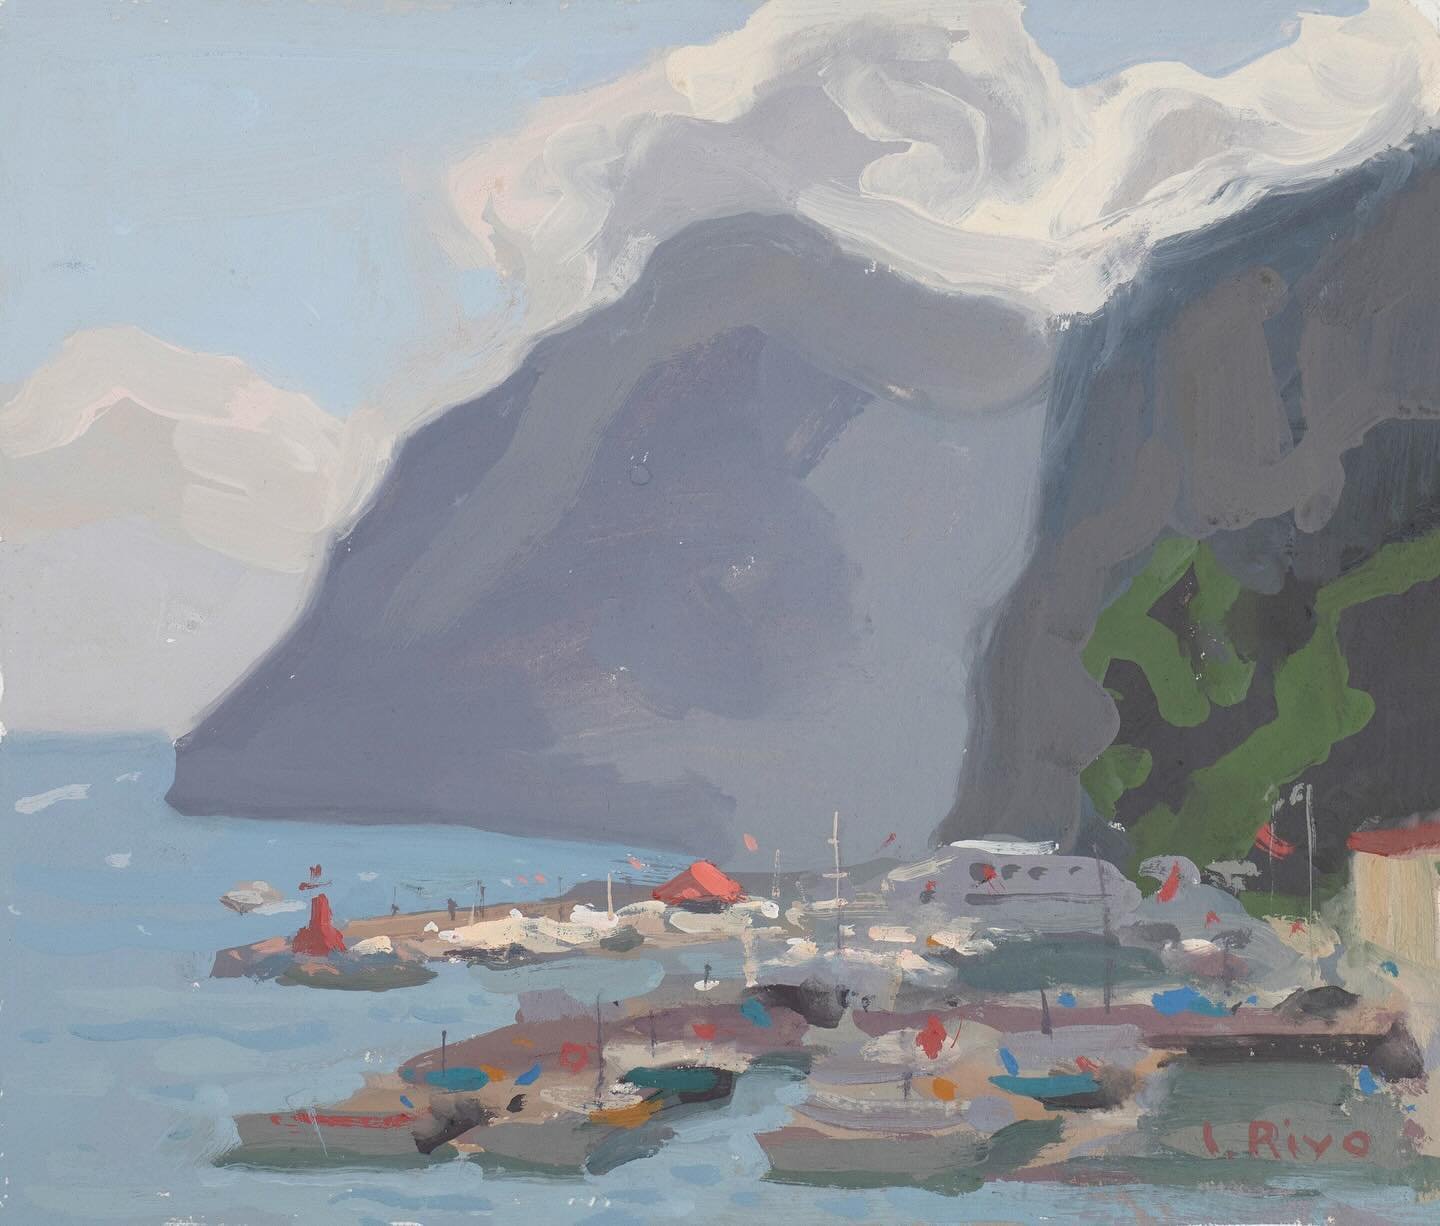 Misty morning in Capri. I painted this on my trip to Capri last summer. Gouache on paper. 7x9 in. 
***
If you have questions about my color palette or other materials that I use in painting with gouache, please download my free 30-page pdf guide at t